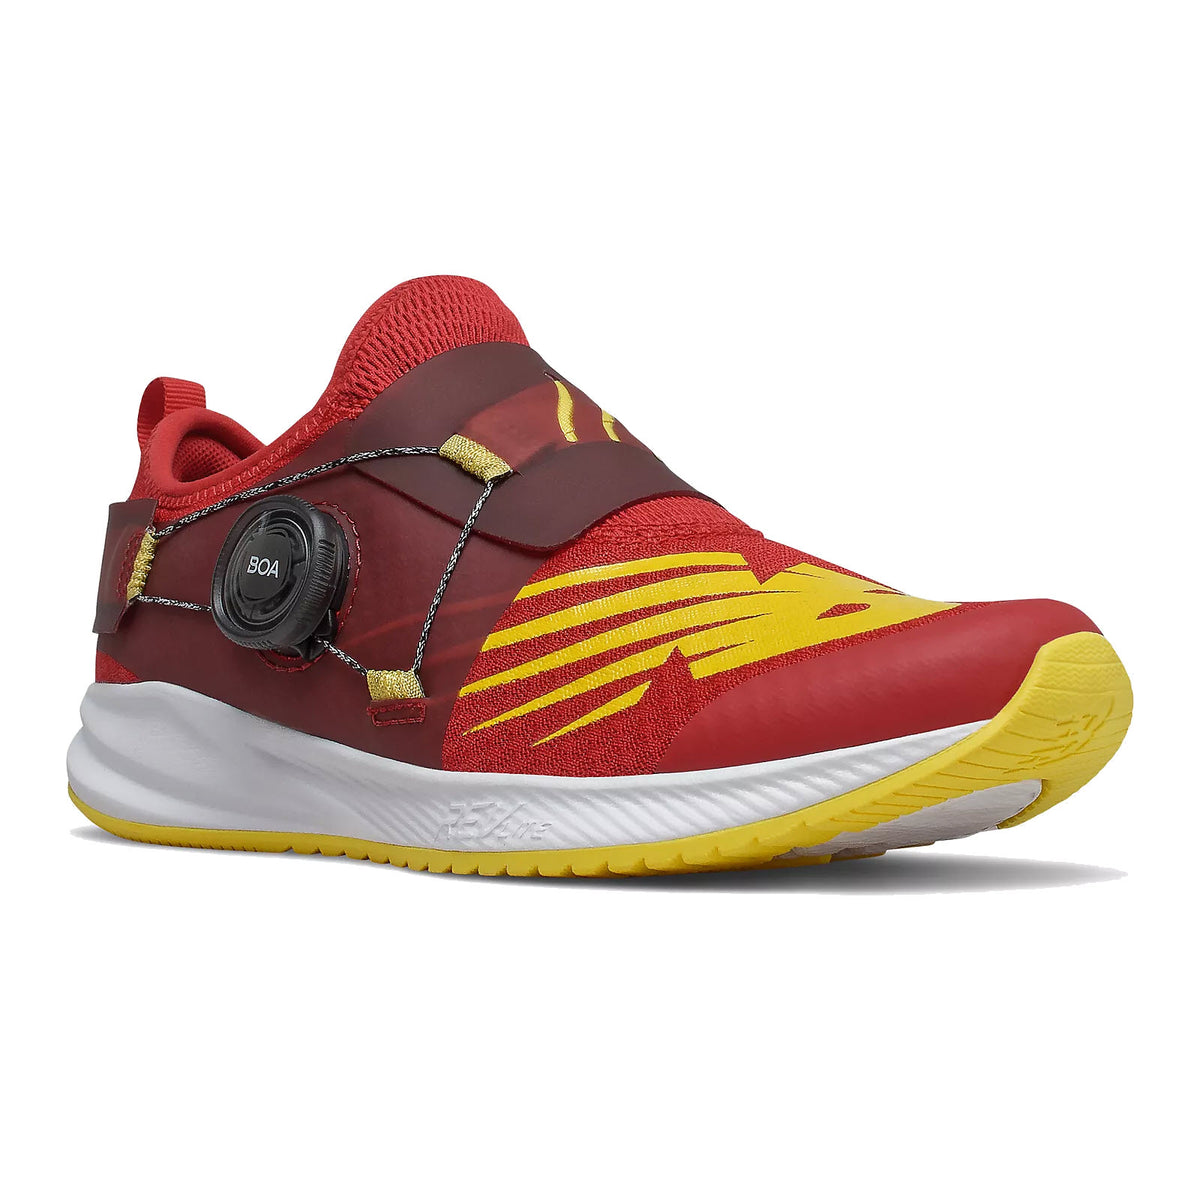 Red and yellow New Balance FuelCore Reveal BOA athletic shoe.